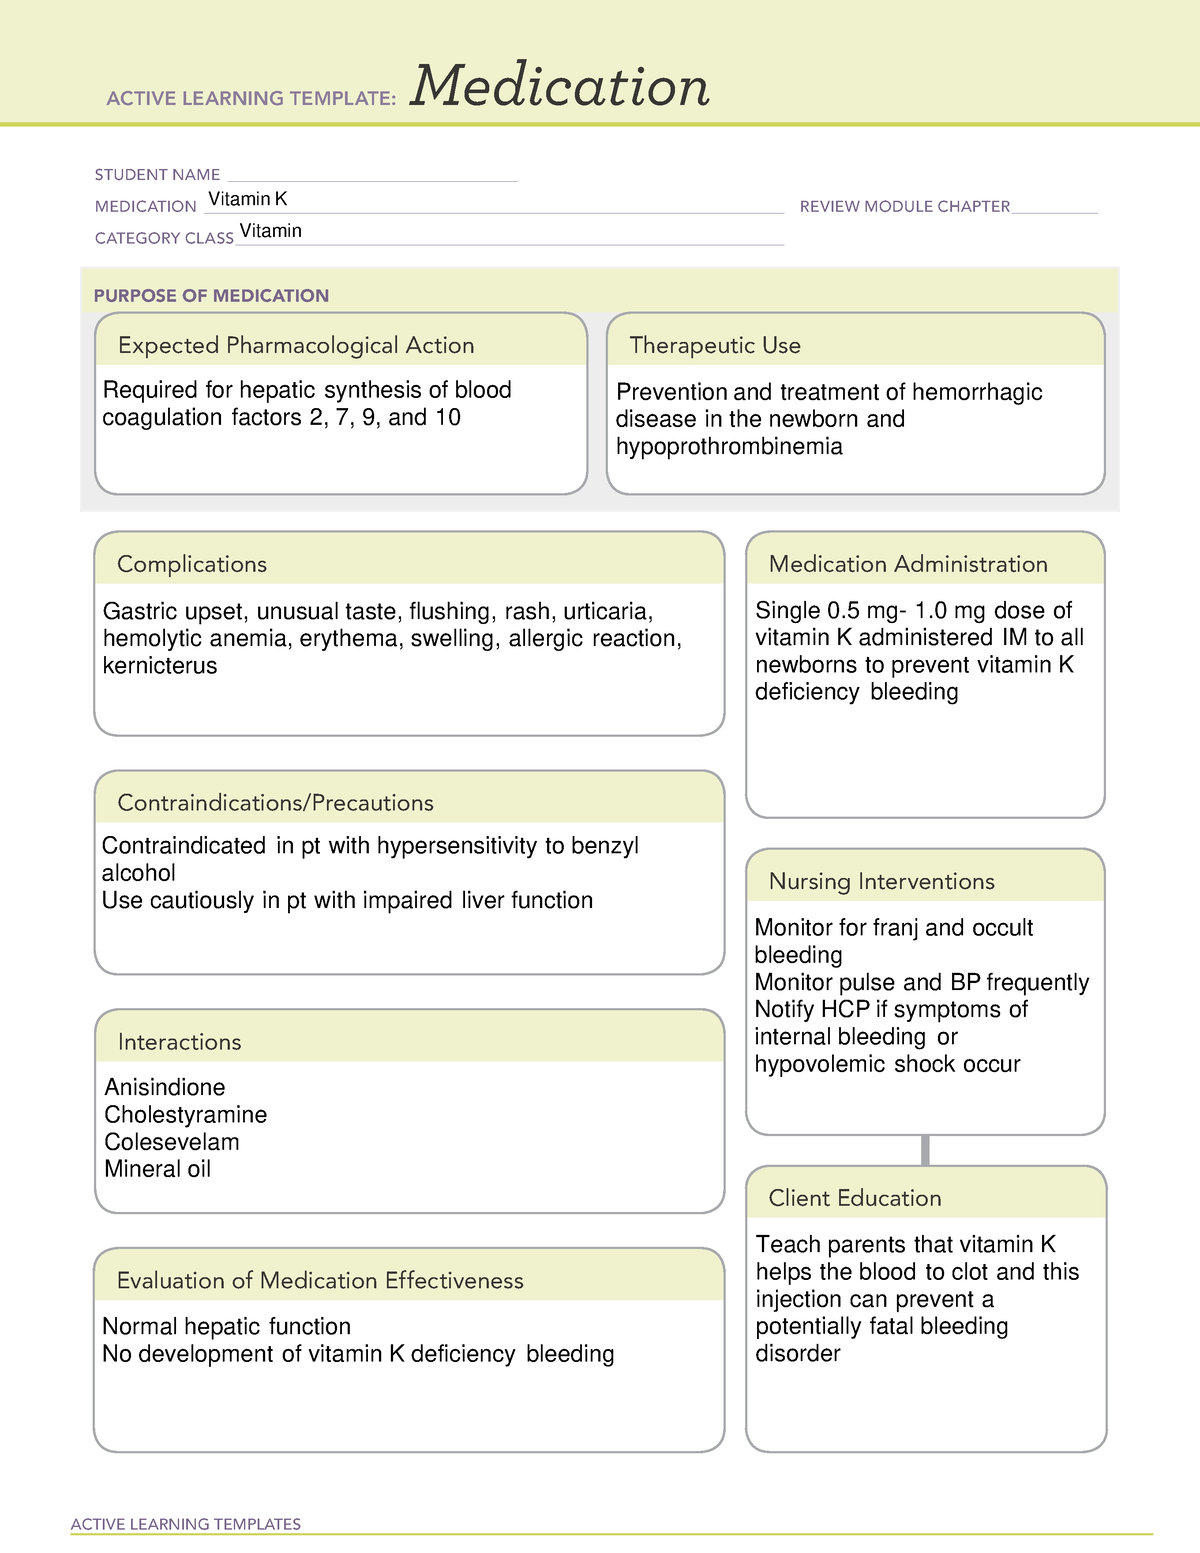 vitamin-k-n-a-active-learning-templates-medication-student-name